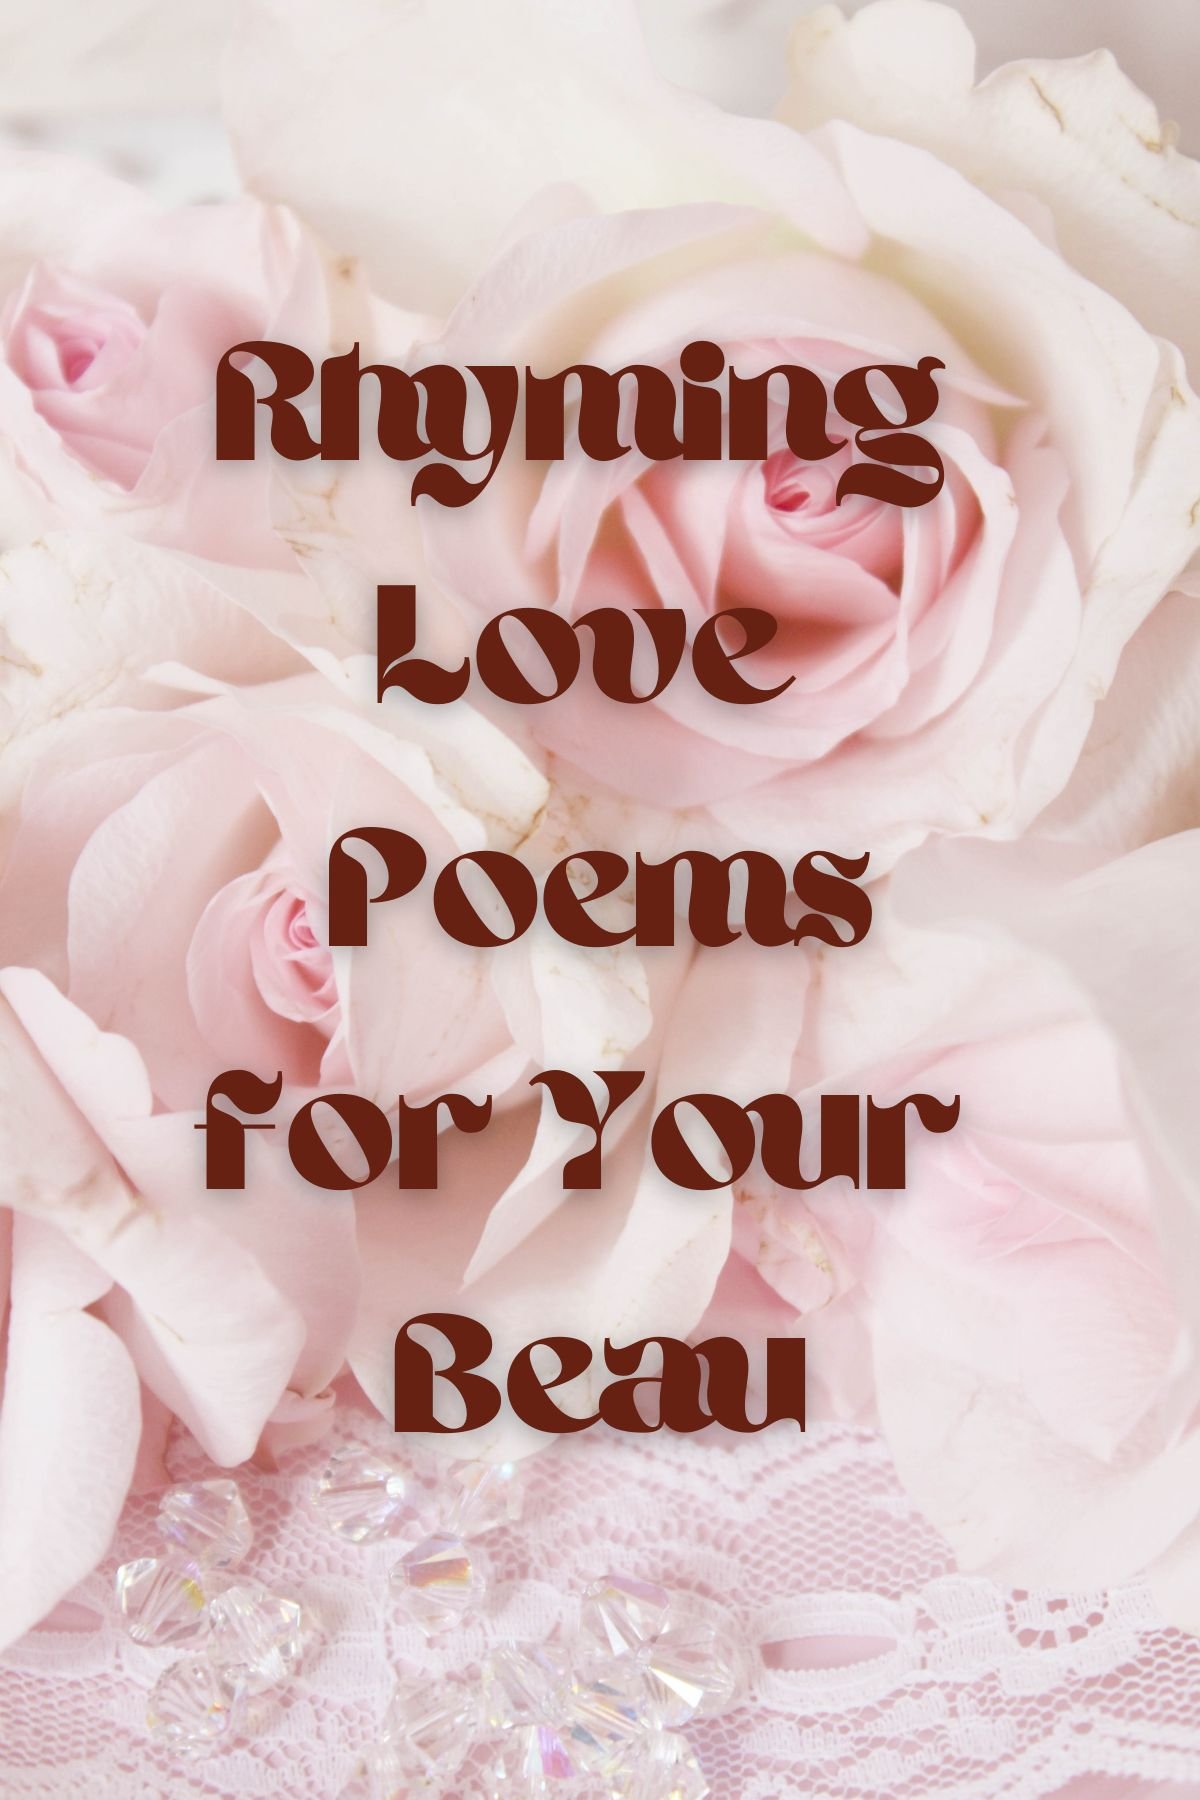 rhyming love poems for your beau